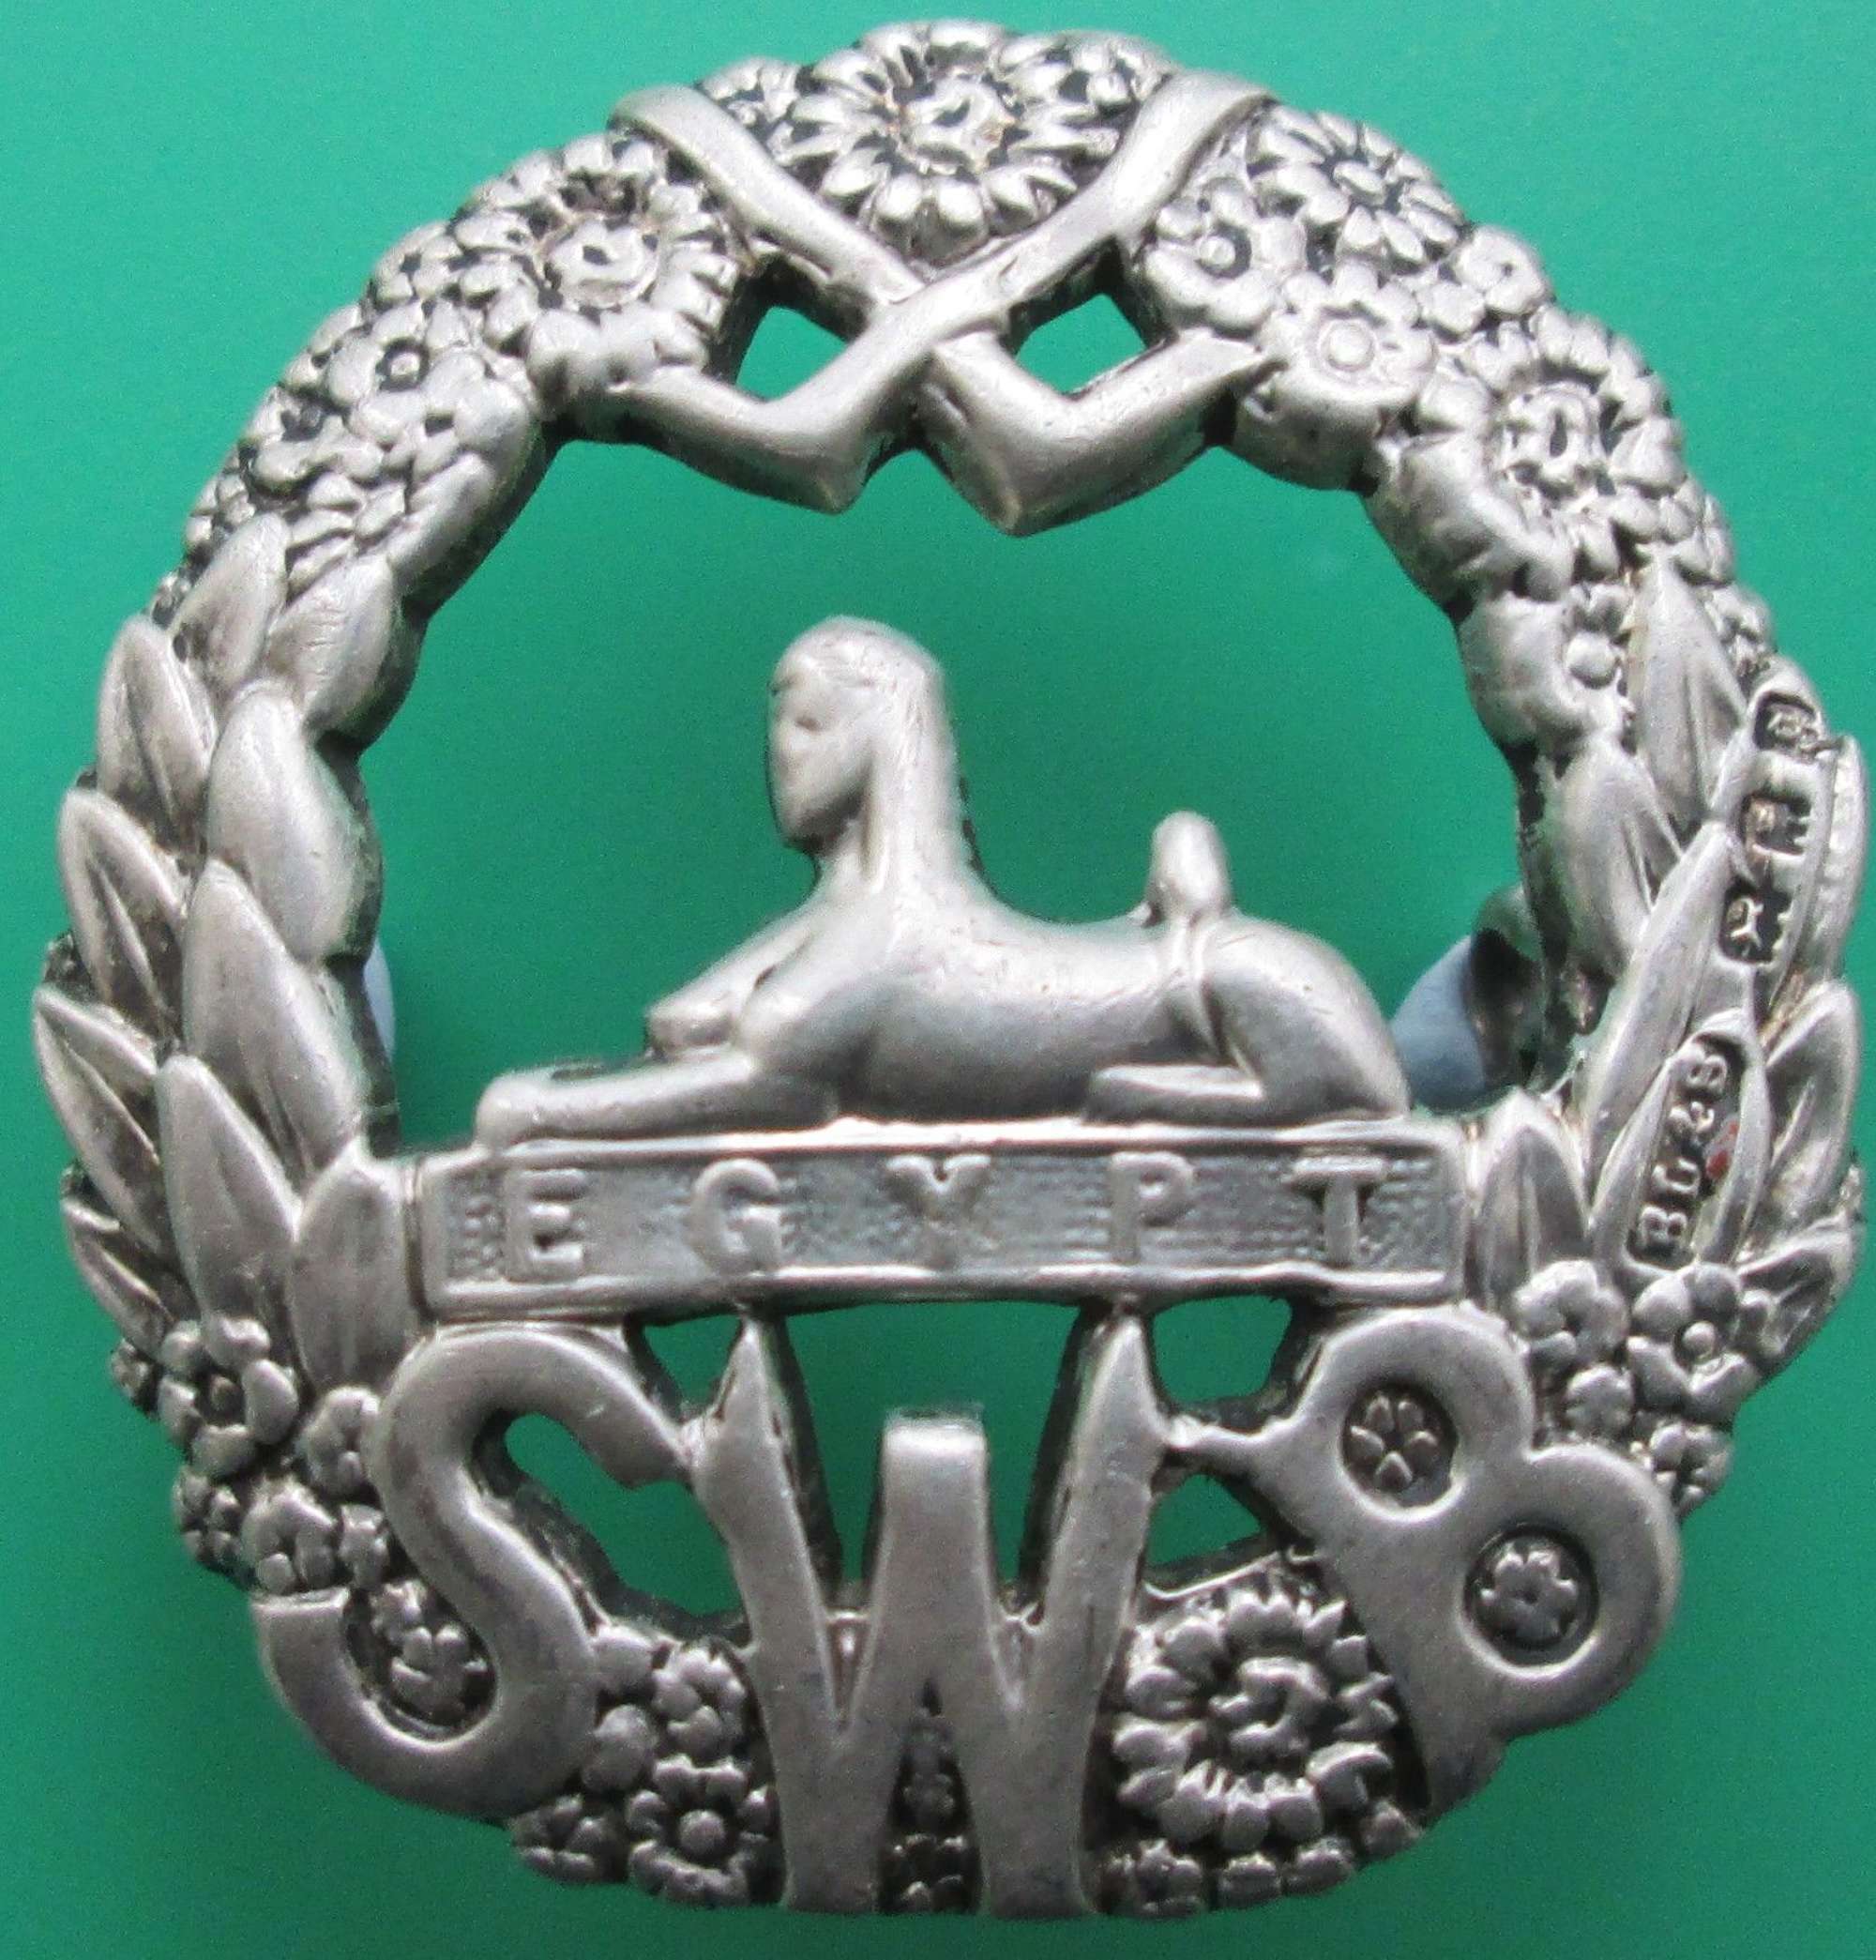 A SOUTH WALES BORDERS OFFICERS SILVER CAP BADGE